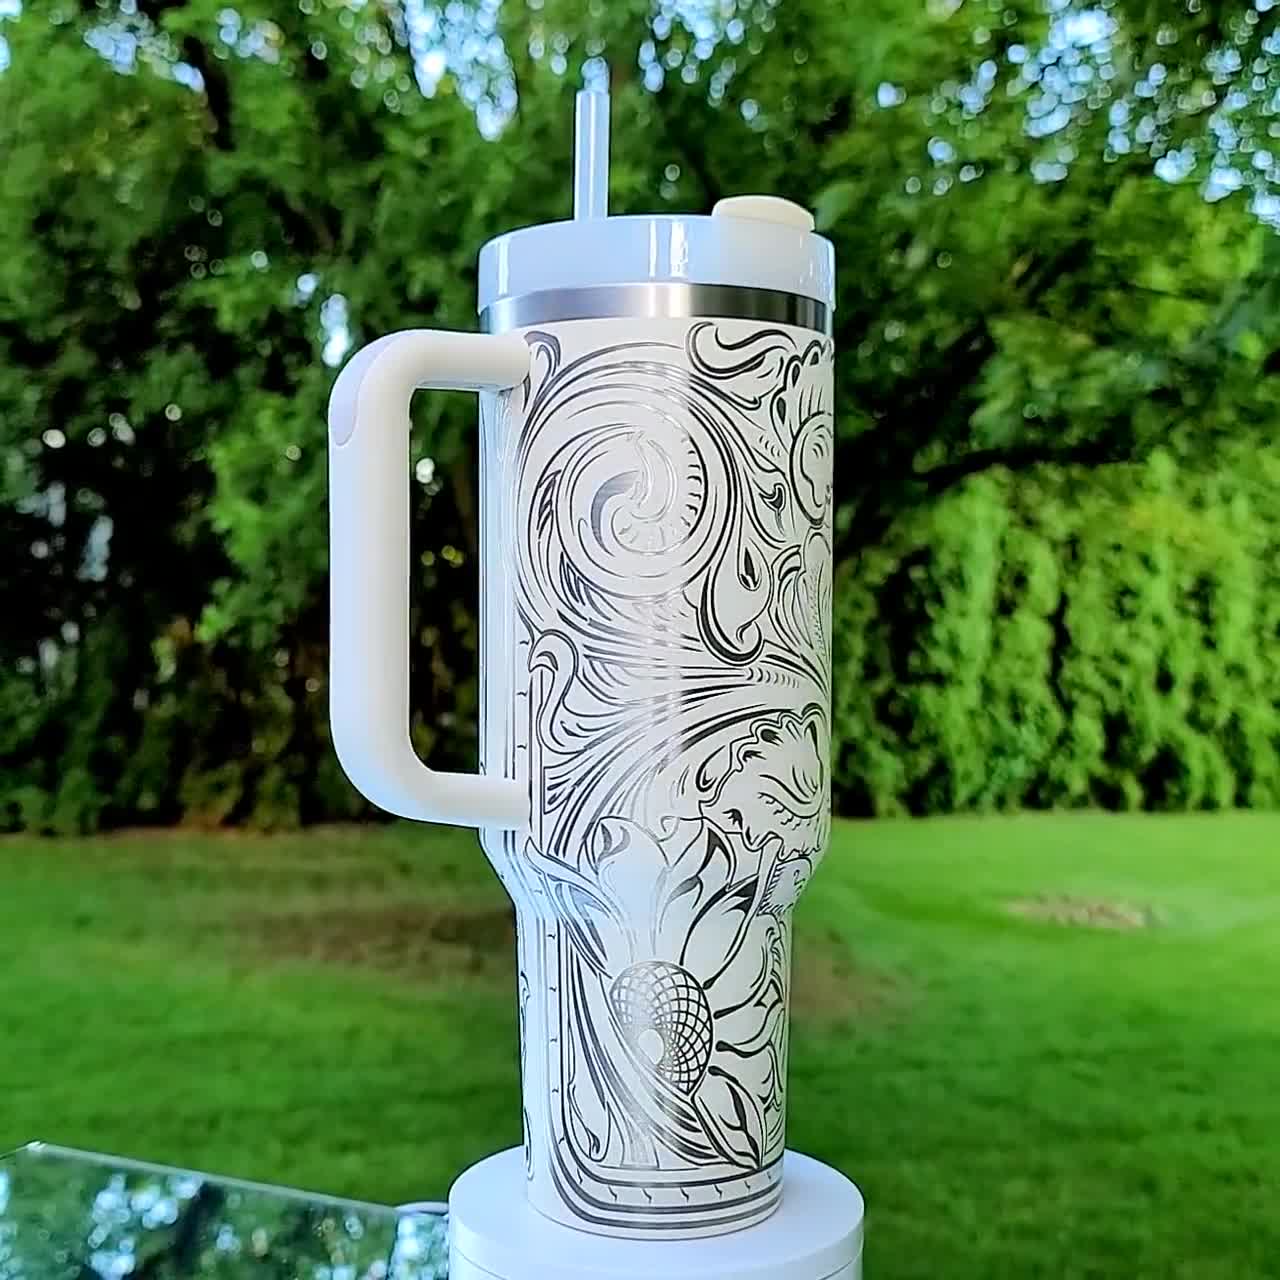 Apricot Simple Modern Trek Tumbler with Tooled Leather Sunflower Engraving